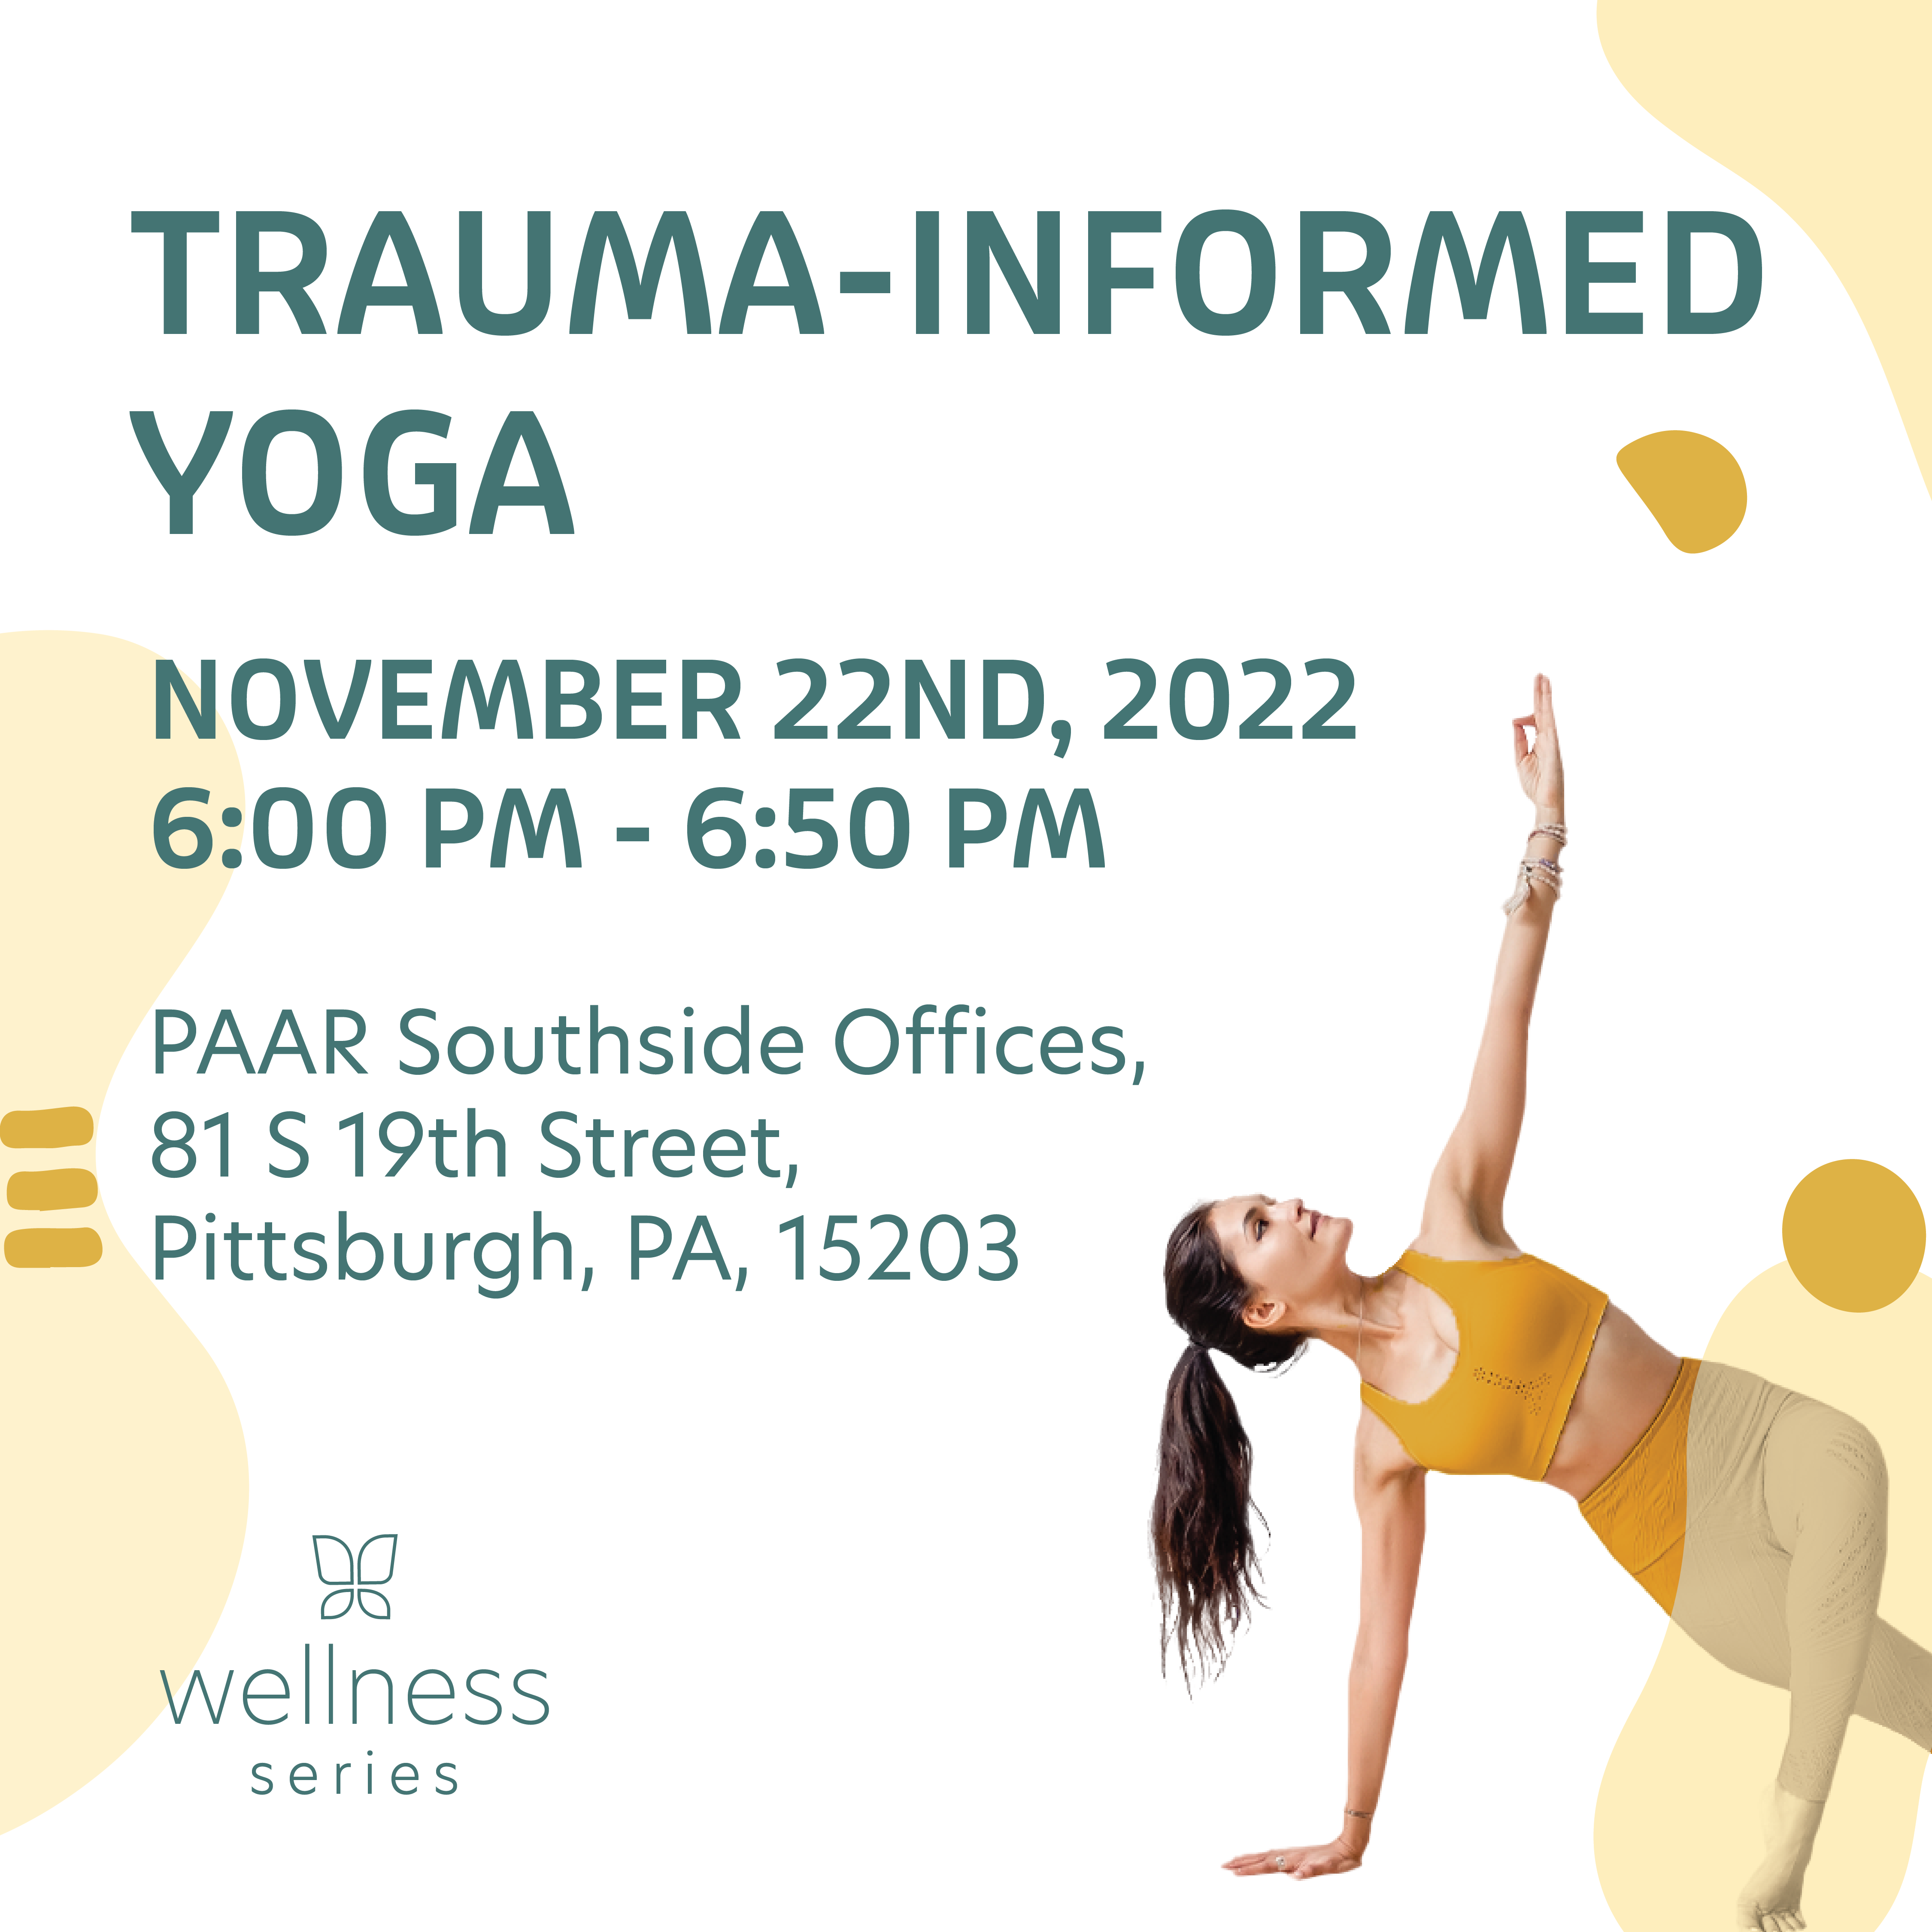 Trauma-Informed Yoga November 22nd, 2022 6:00 PM - 6:50 PM PAAR Southside Offices, 81 S 19th Street, Pittsburgh, PA, 15203